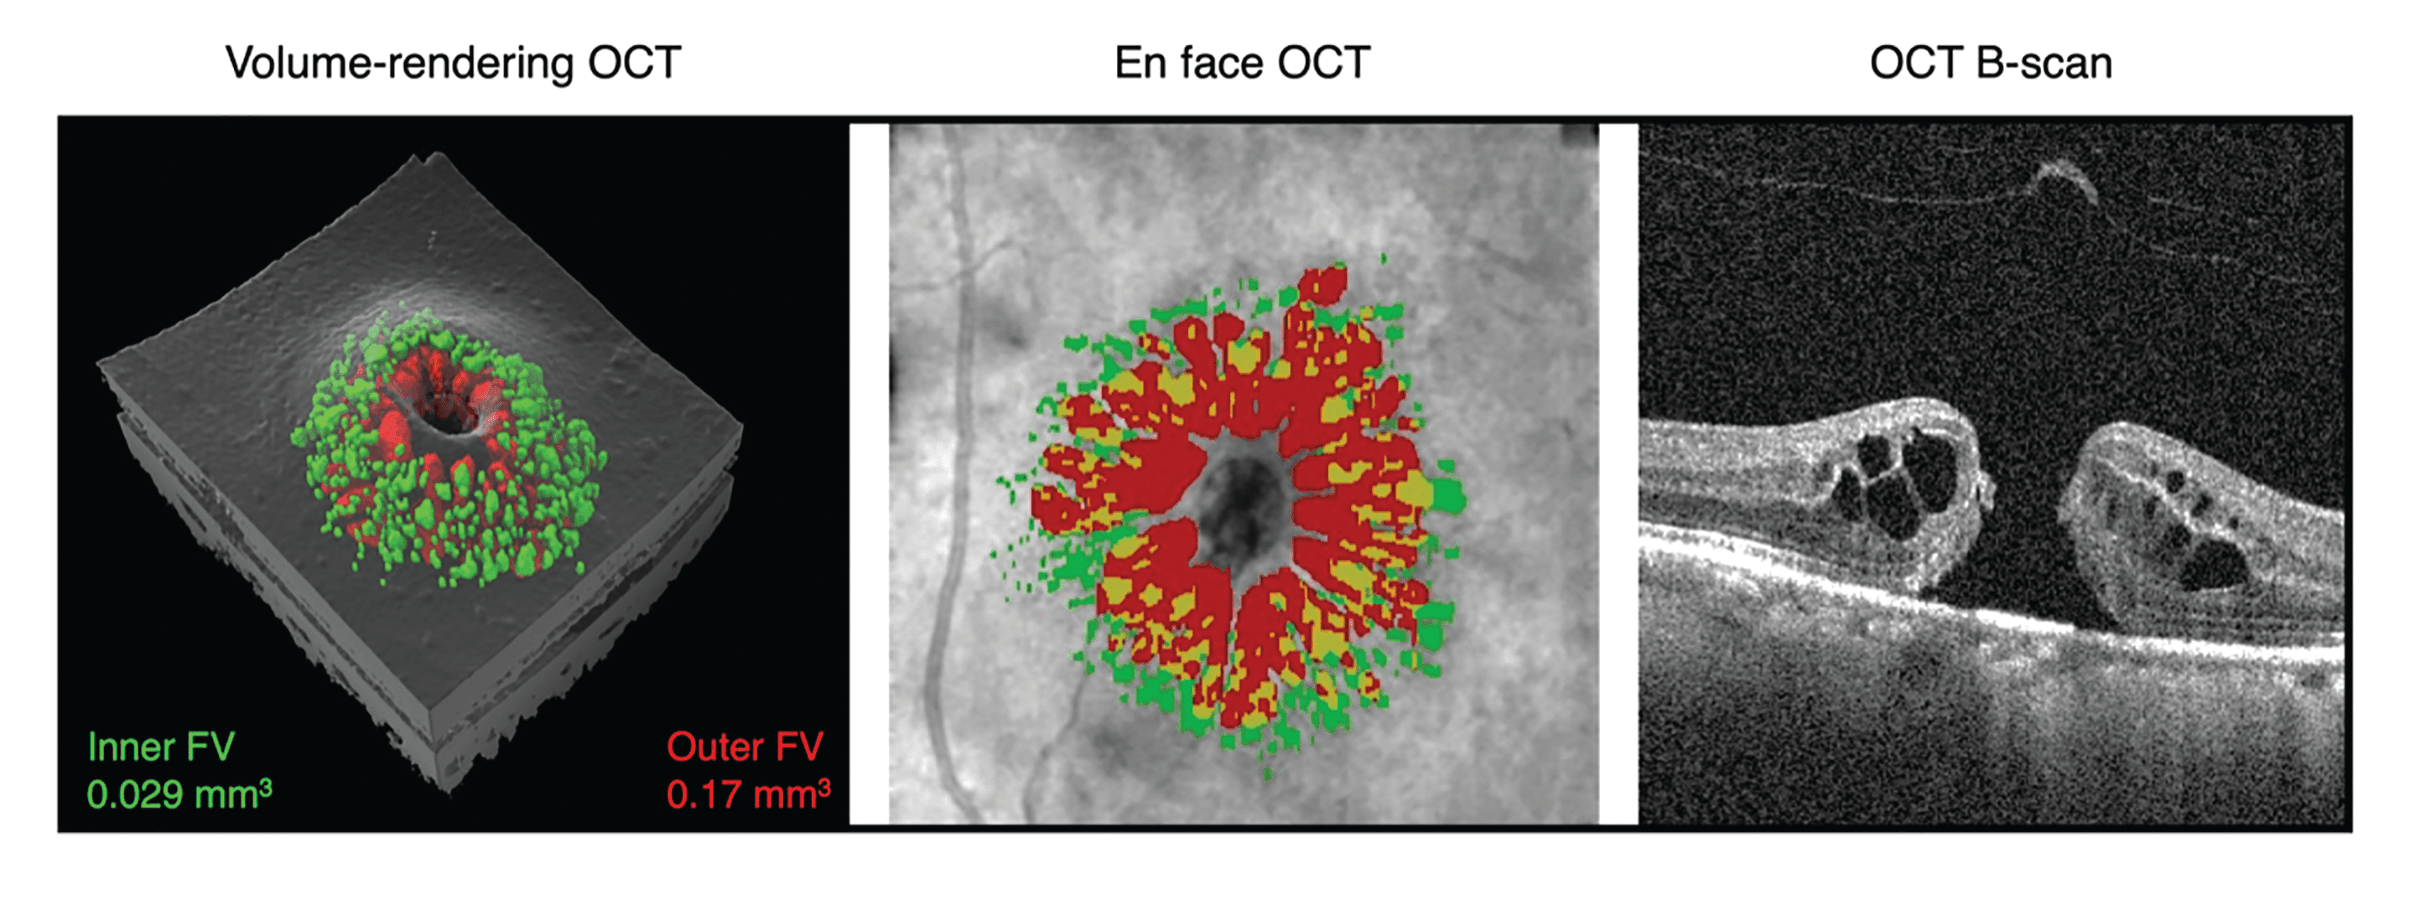 volume-rendering OCT shows outer fluid volume is greater than inner fluid value macular home repair